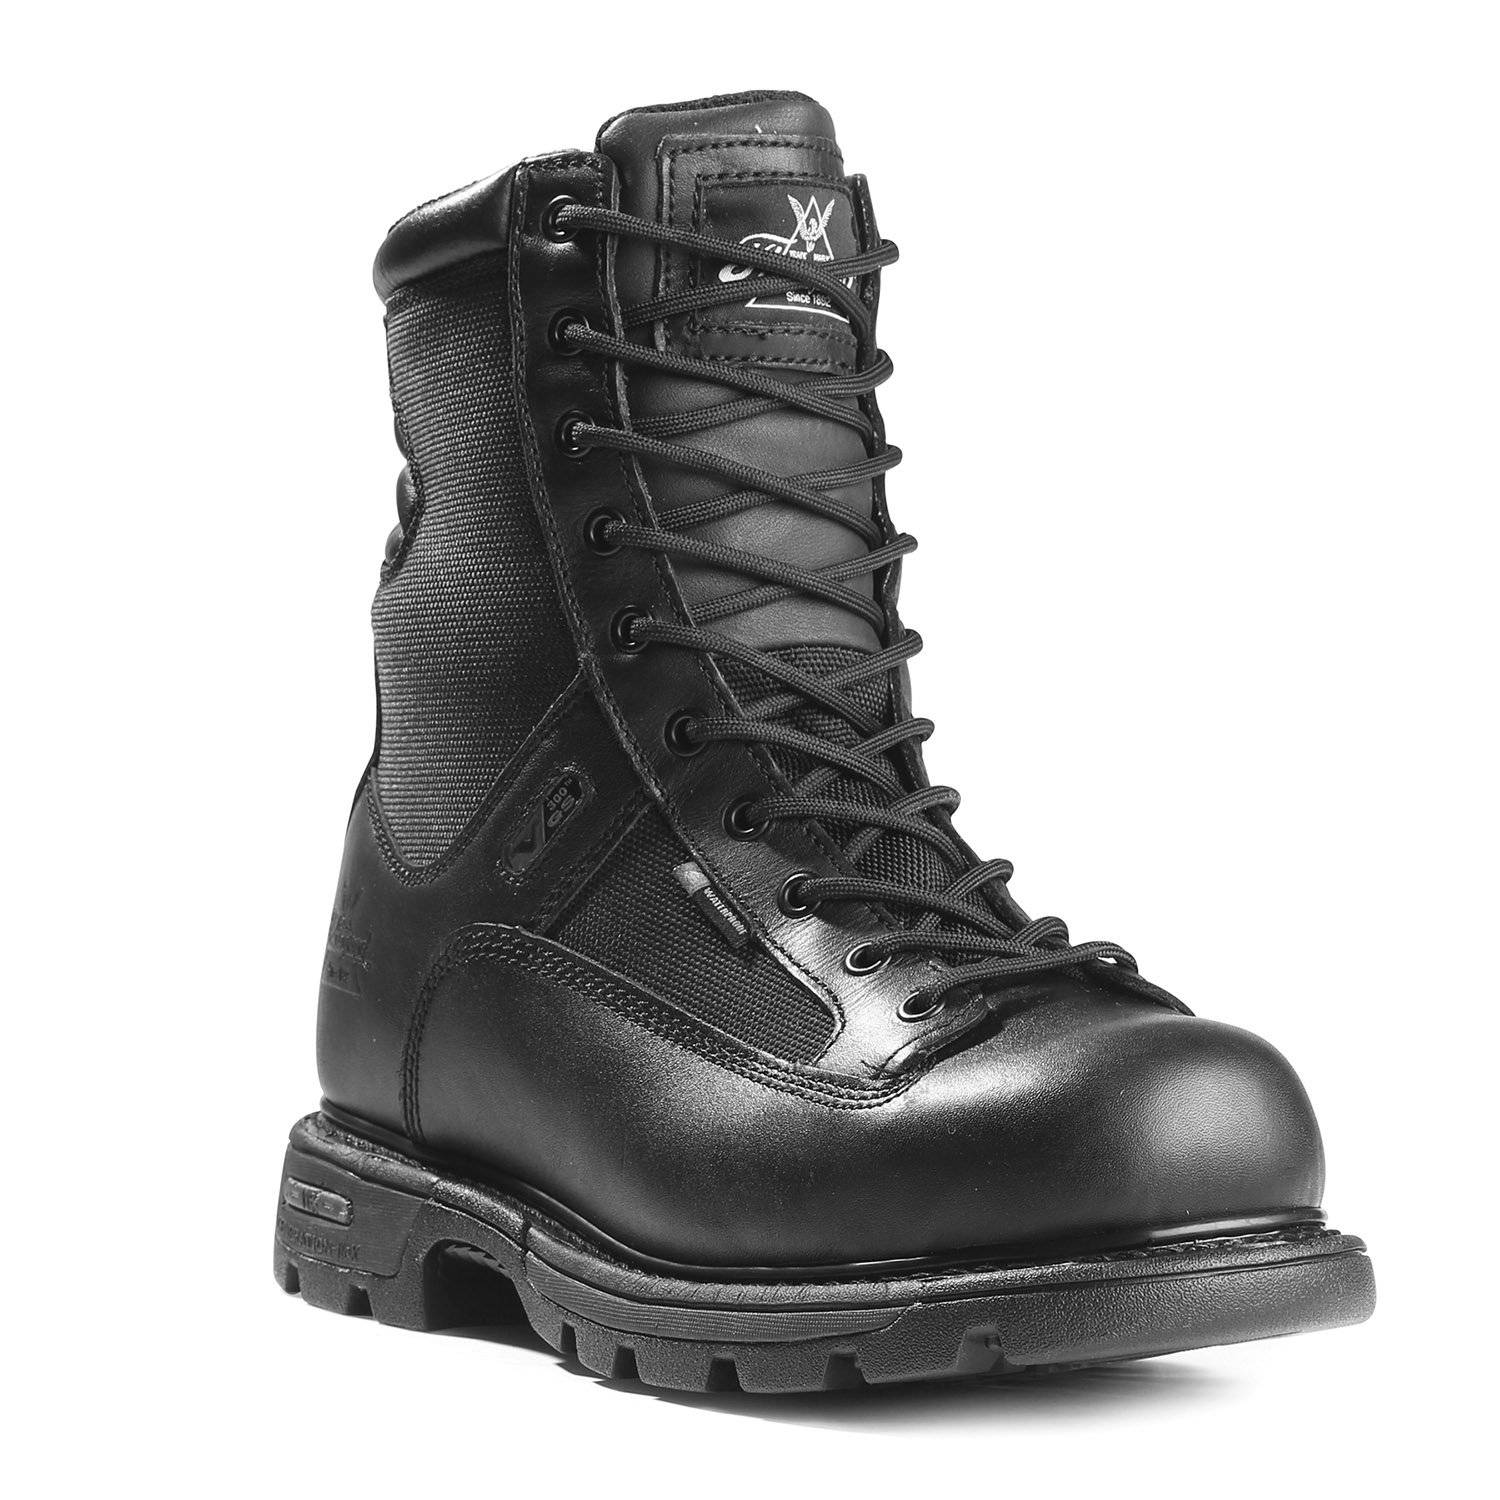 Combat Boots Police Boots and Firefighter Work Boots Black Leather Side-Zip Uniform Dress Boots EMS Boots Thorogood GEN-Flex2 8” Tactical Boots For Men and Women 